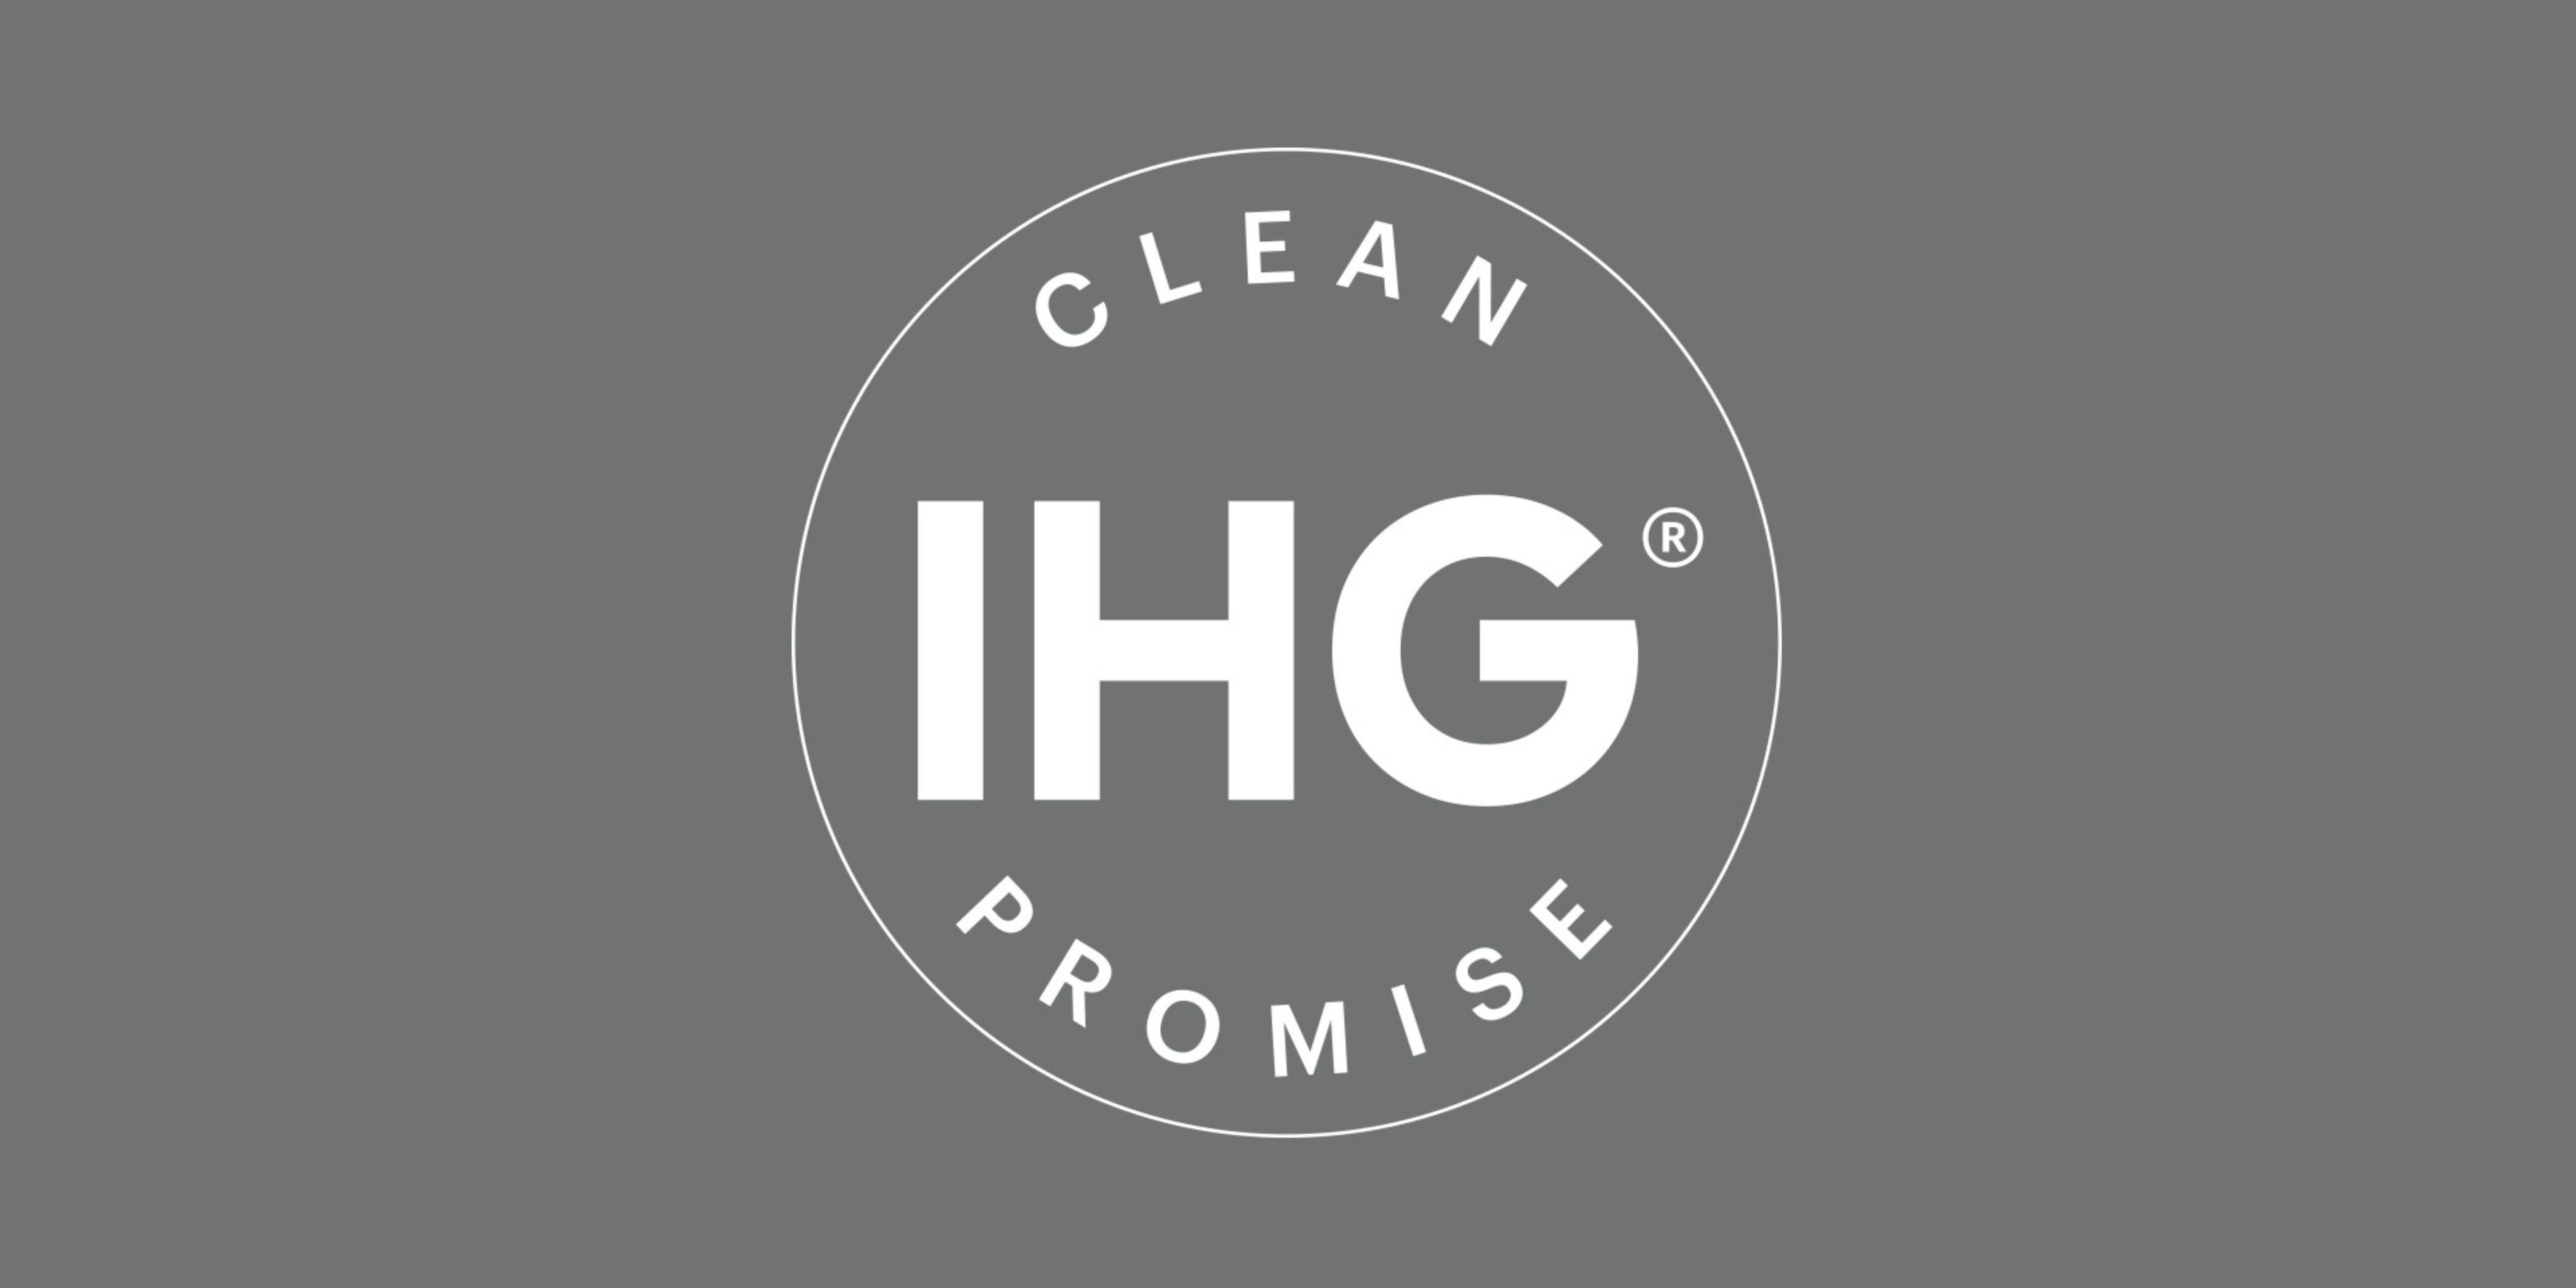 As the world adjusts to new travel norms and expectations, IHG® Hotels & Resorts is enhancing the experience for its hotel guests around the world, by redefining cleanliness and supporting guests’ personal well-being throughout their stay. Our hotel is committed to delivering on this promise and confident you will notice the difference!
